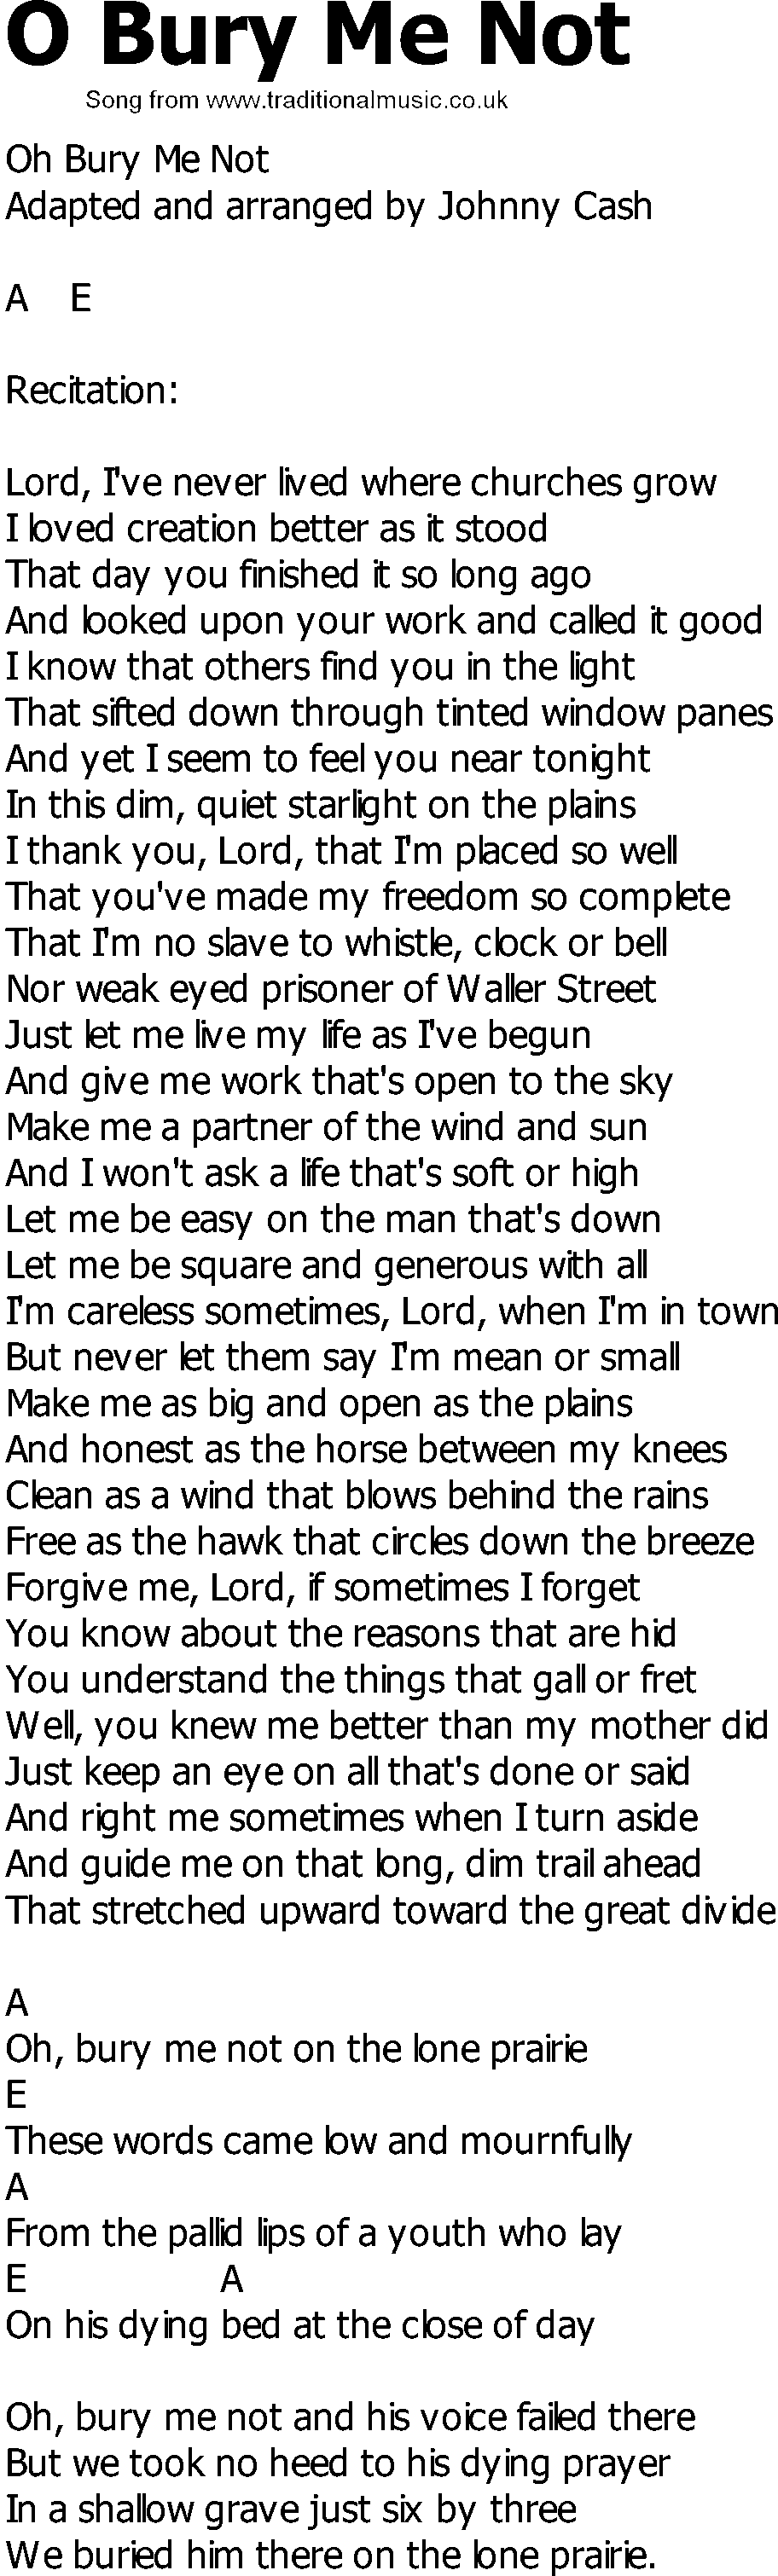 Old Country song lyrics with chords - O Bury Me Not